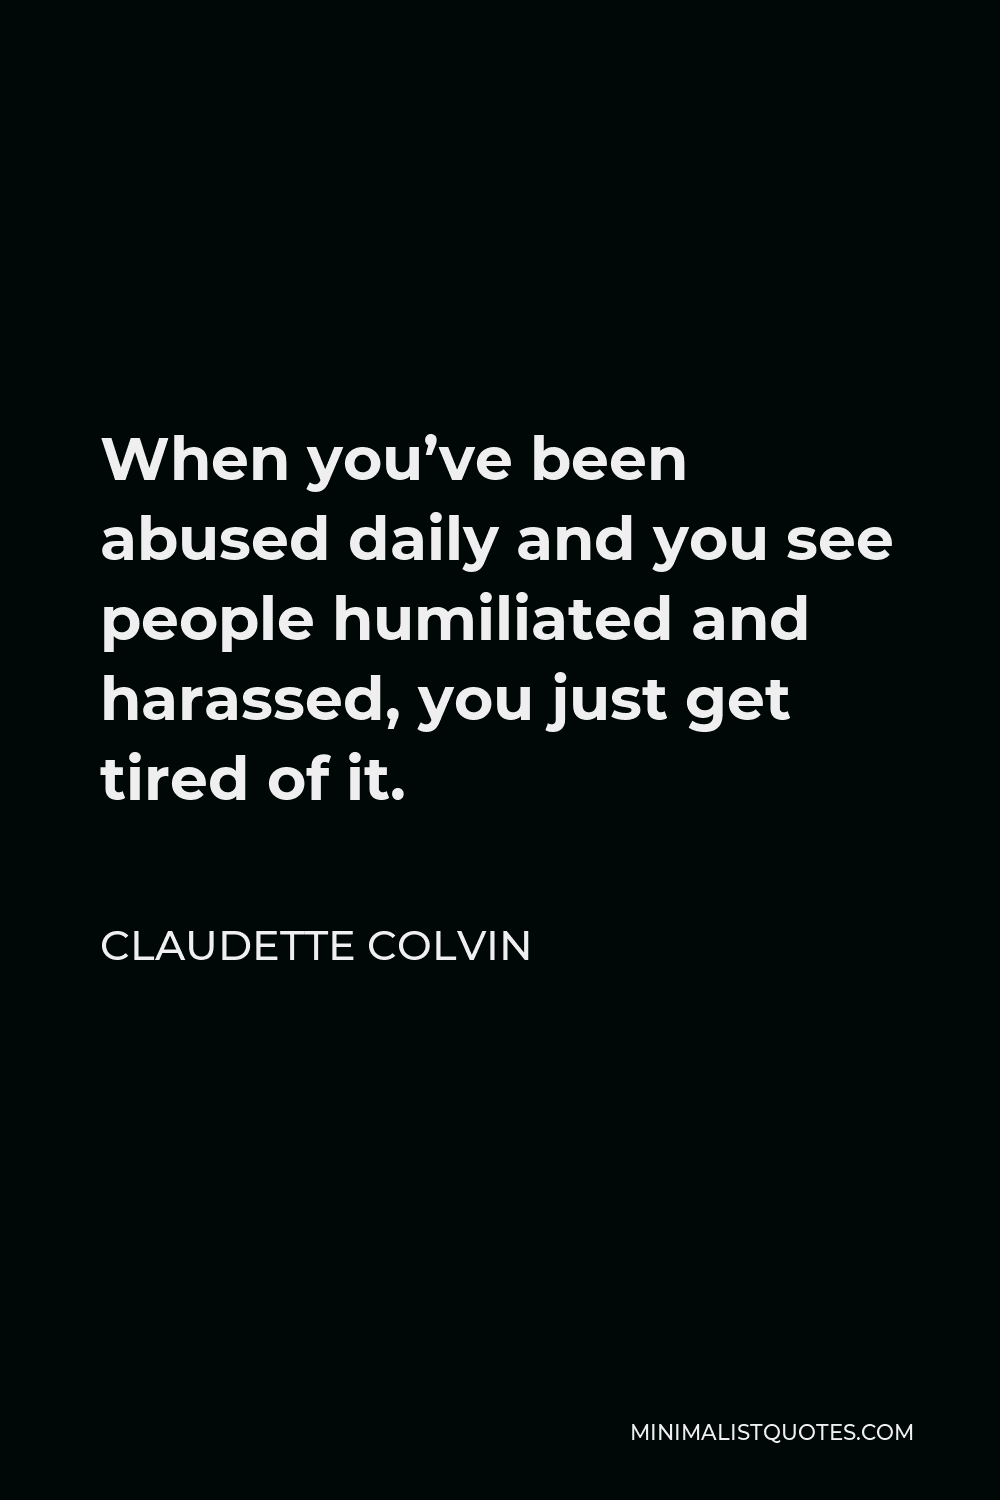 Claudette Colvin Quote - When you’ve been abused daily and you see people humiliated and harassed, you just get tired of it.